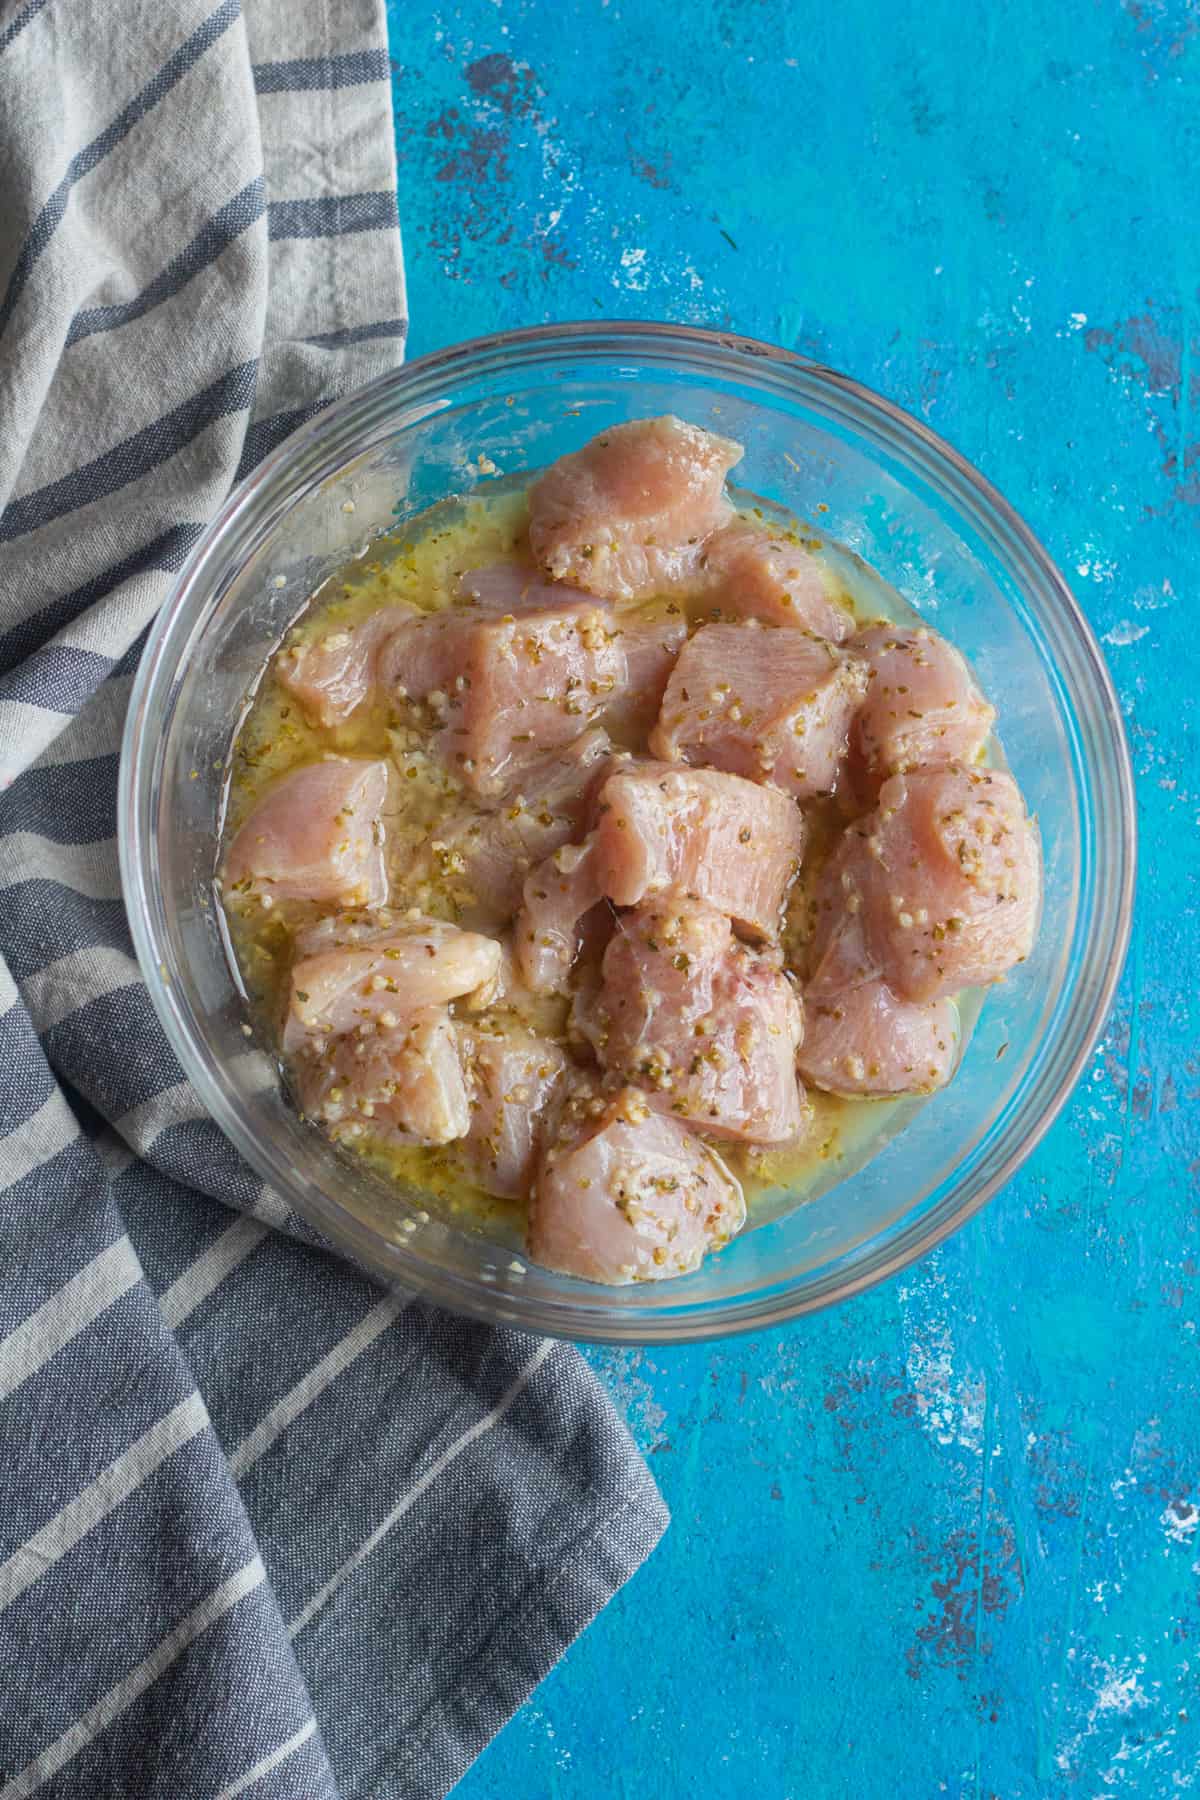 cut chicken into bite size pieces and mix it with olive oil lemon juice and spices. Marinade for at least one hour. 